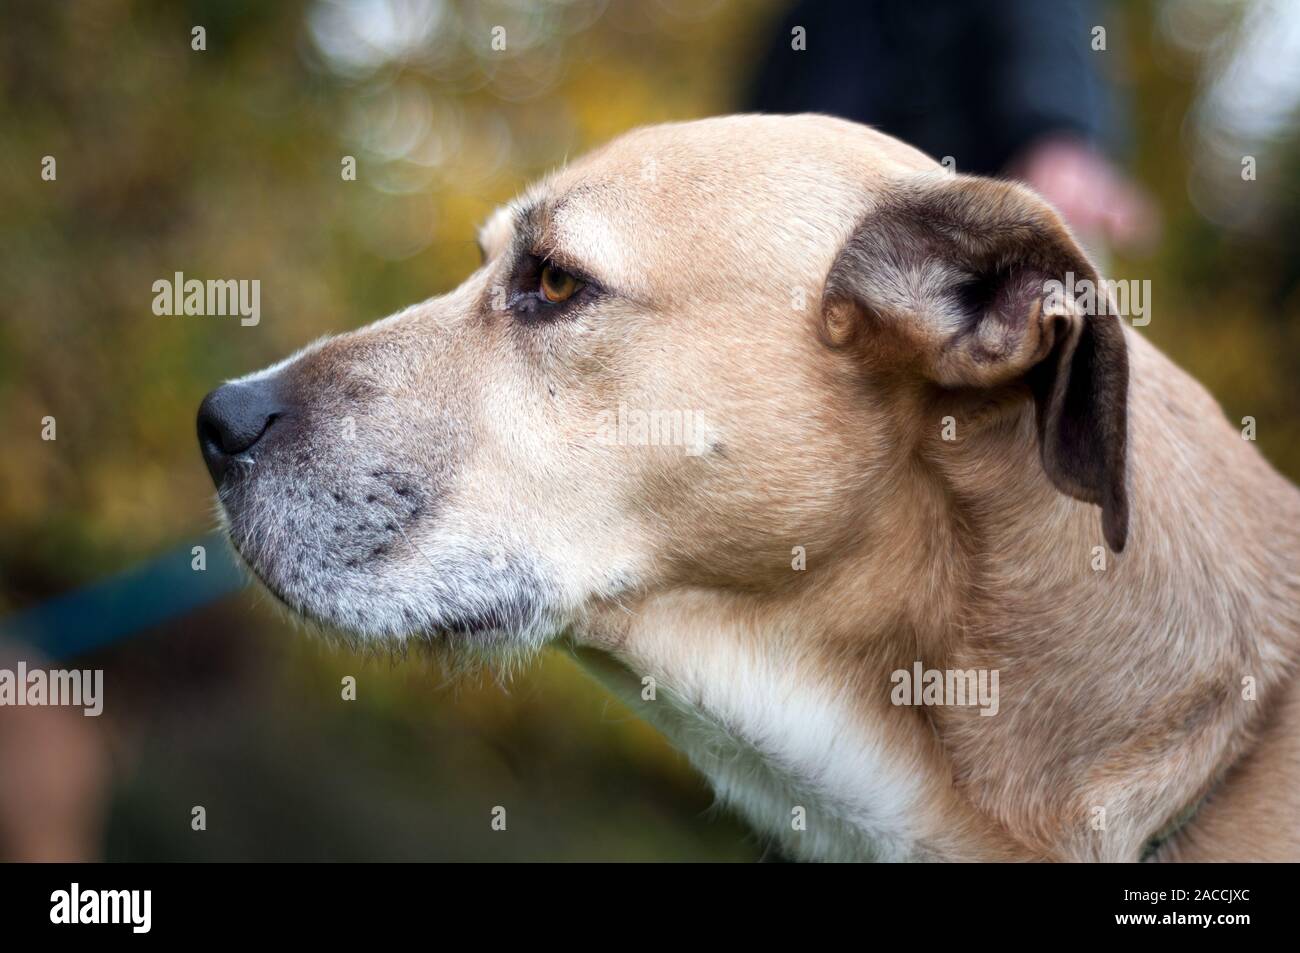 close up of a dog's face in profile with a black nose. beautiful golden eyes. looking far. outdoor.Animal head close up shot. Stock Photo